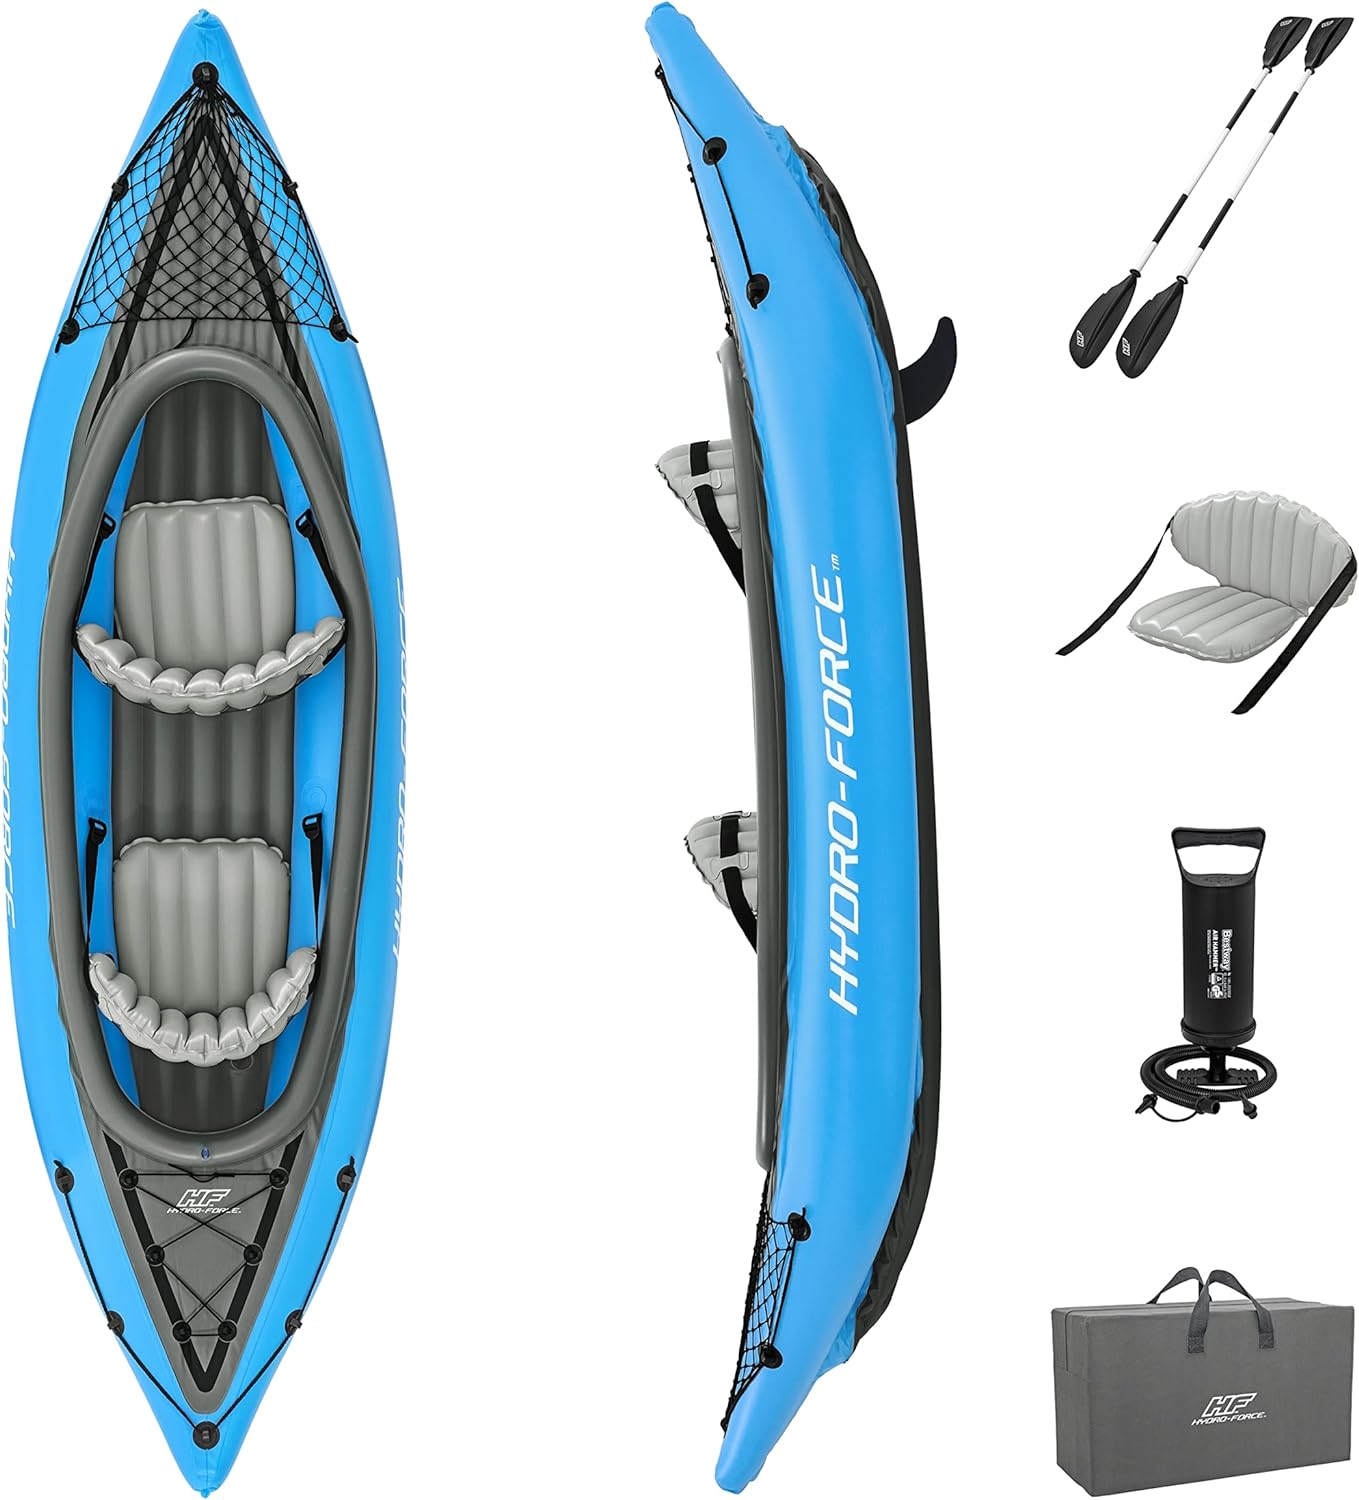 Bestway Hydro Force Inflatable Kayak Set Review